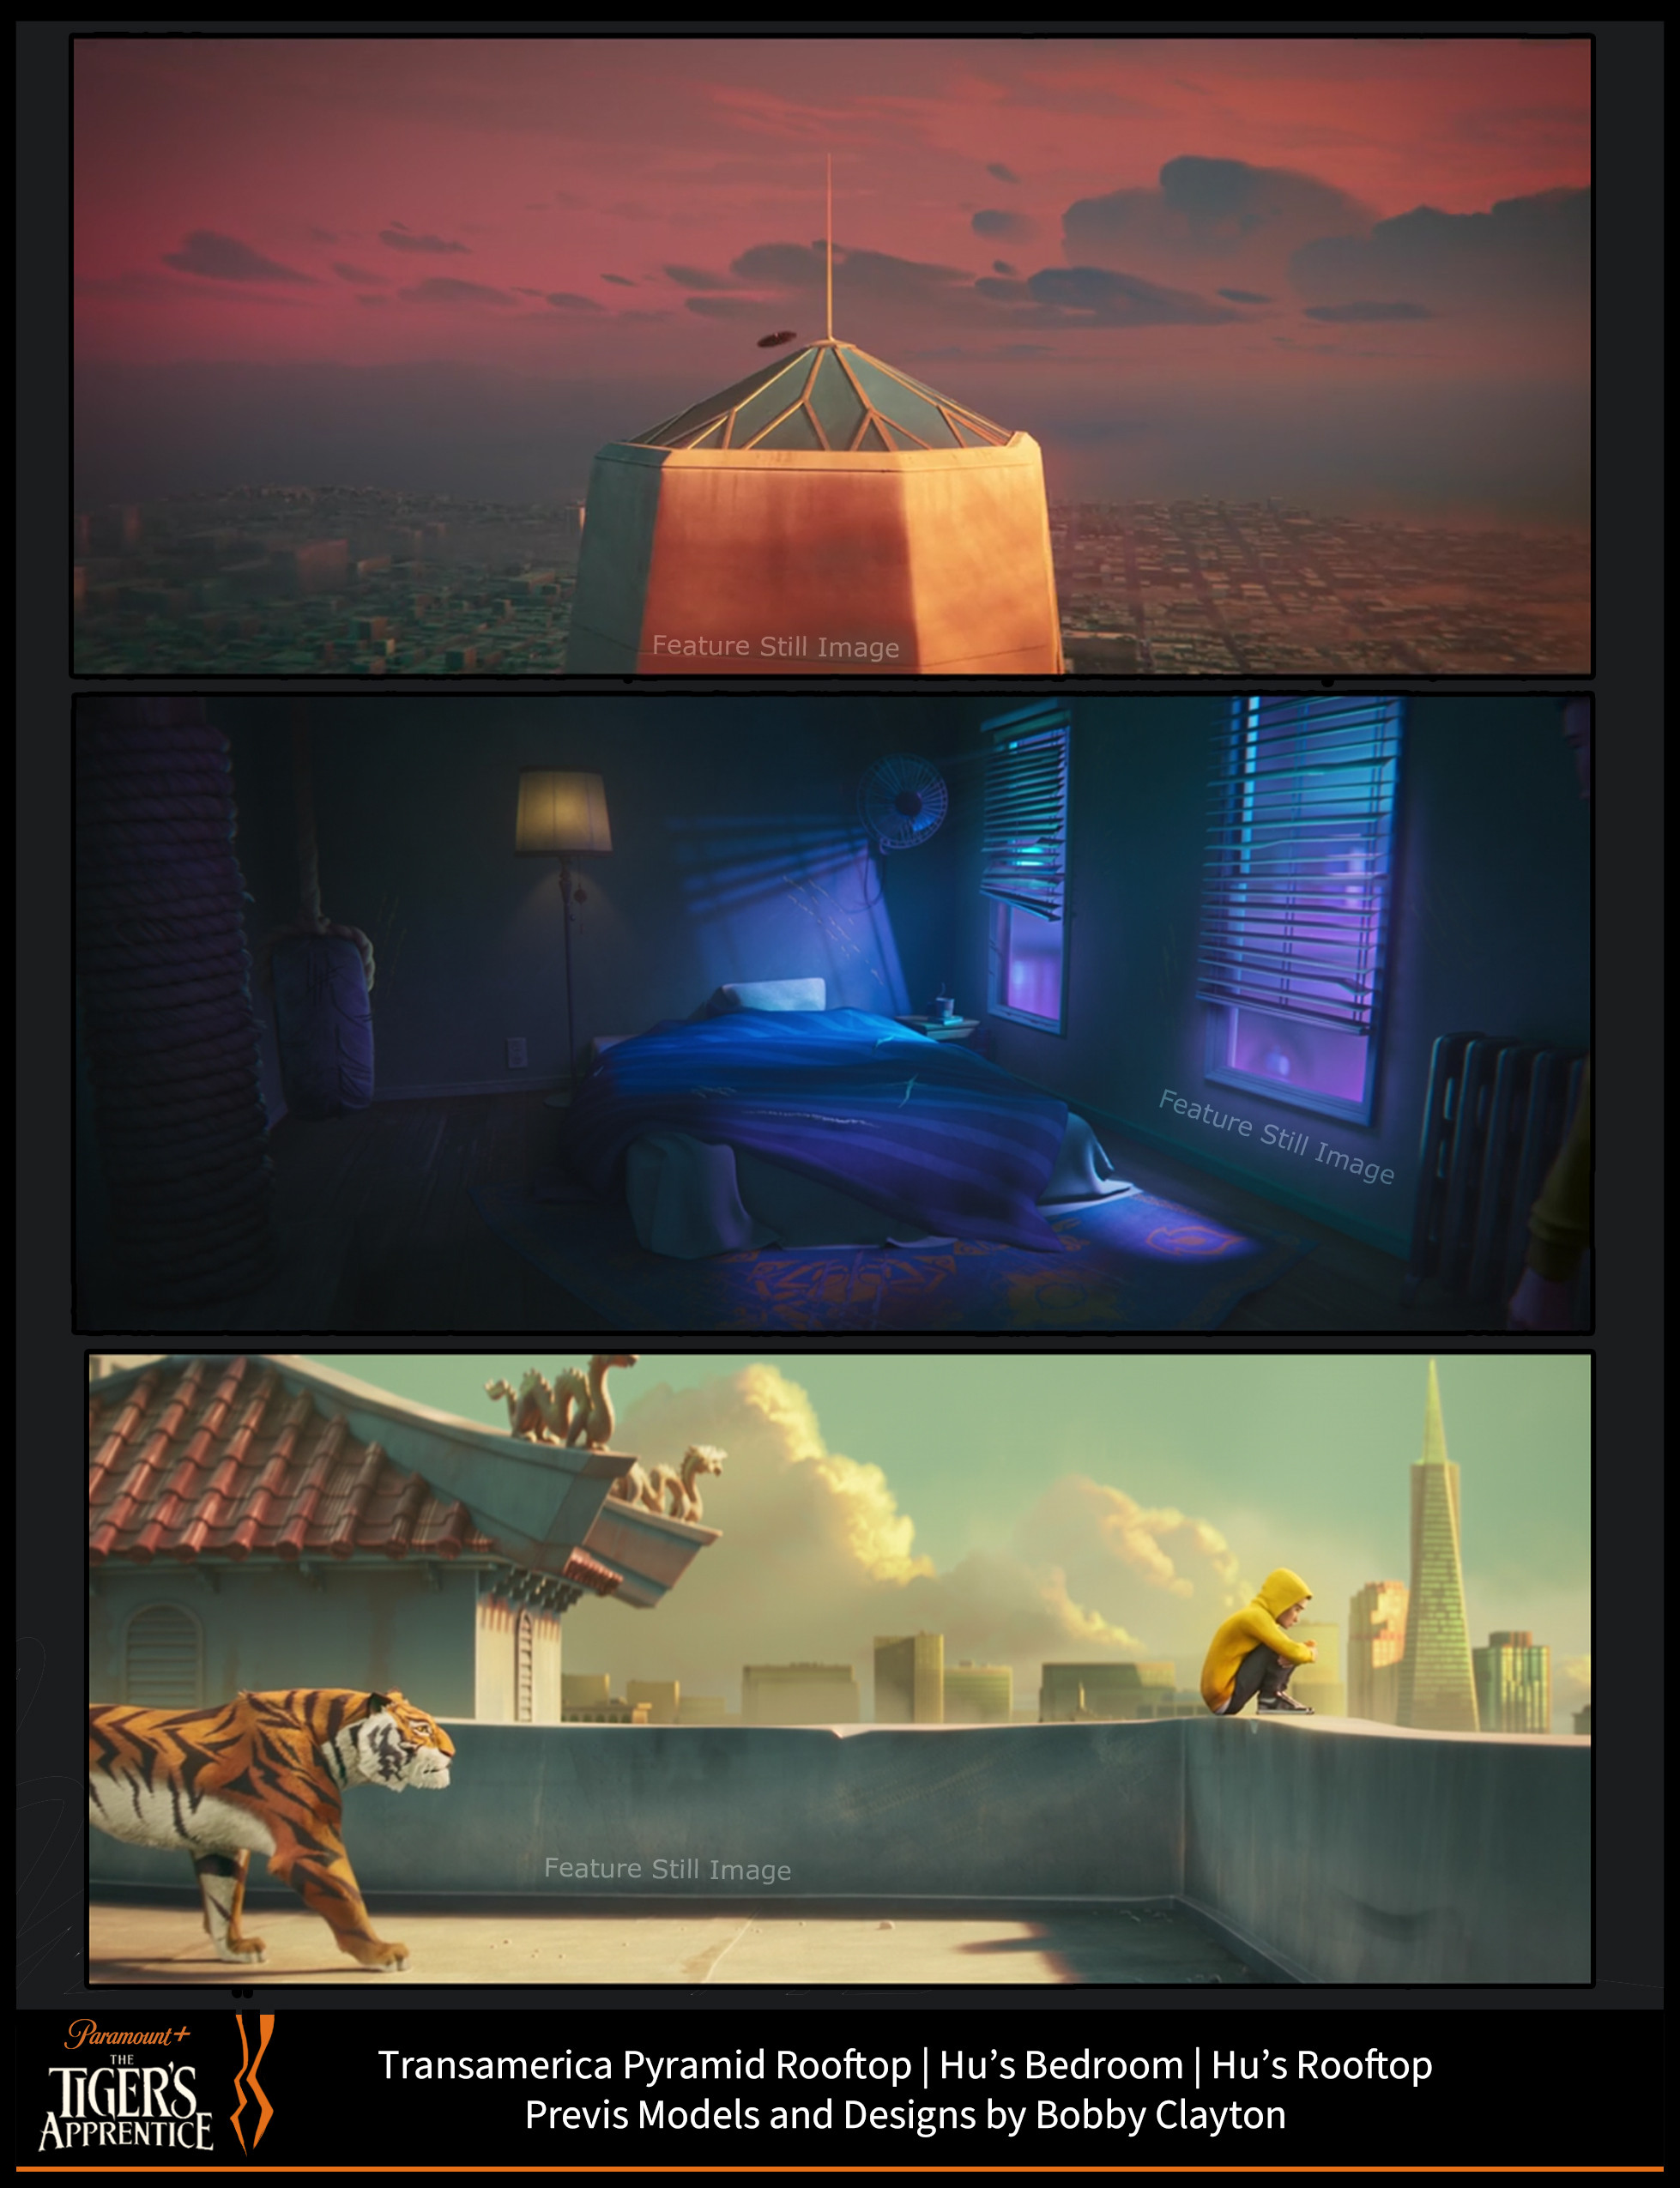 Top: Updated layout of transameric building roof for final act climax.
Mid: Hu's bedroom was a simple previs, but I was given freedom to design it as well!
Bottom: The very first scene I ever modeled for the film!